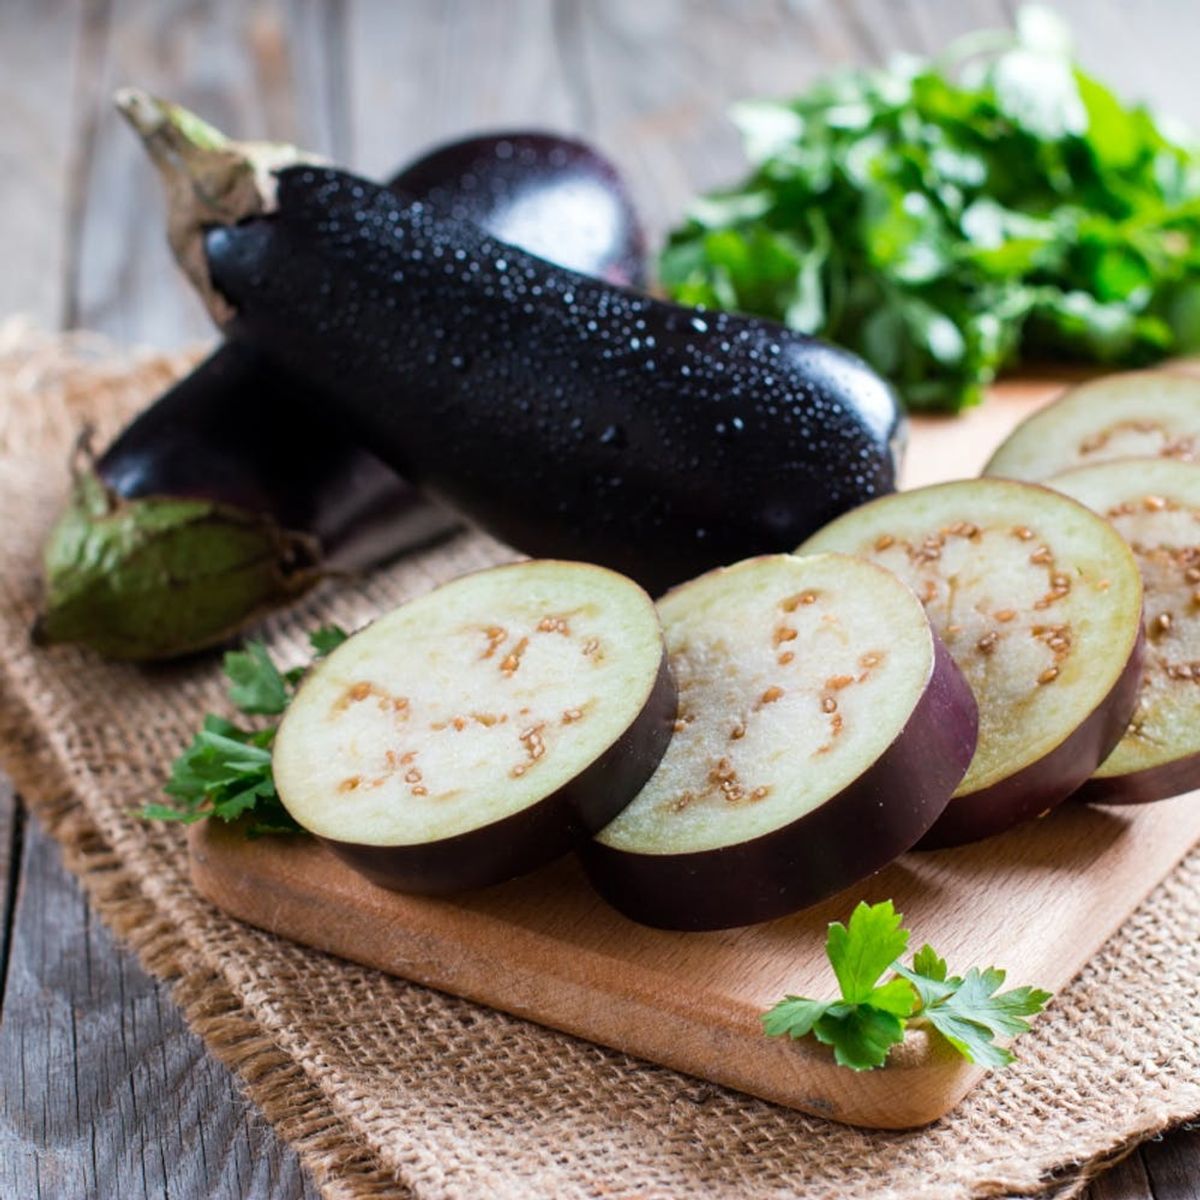 How Nightshade Vegetables Can Impact Your Health